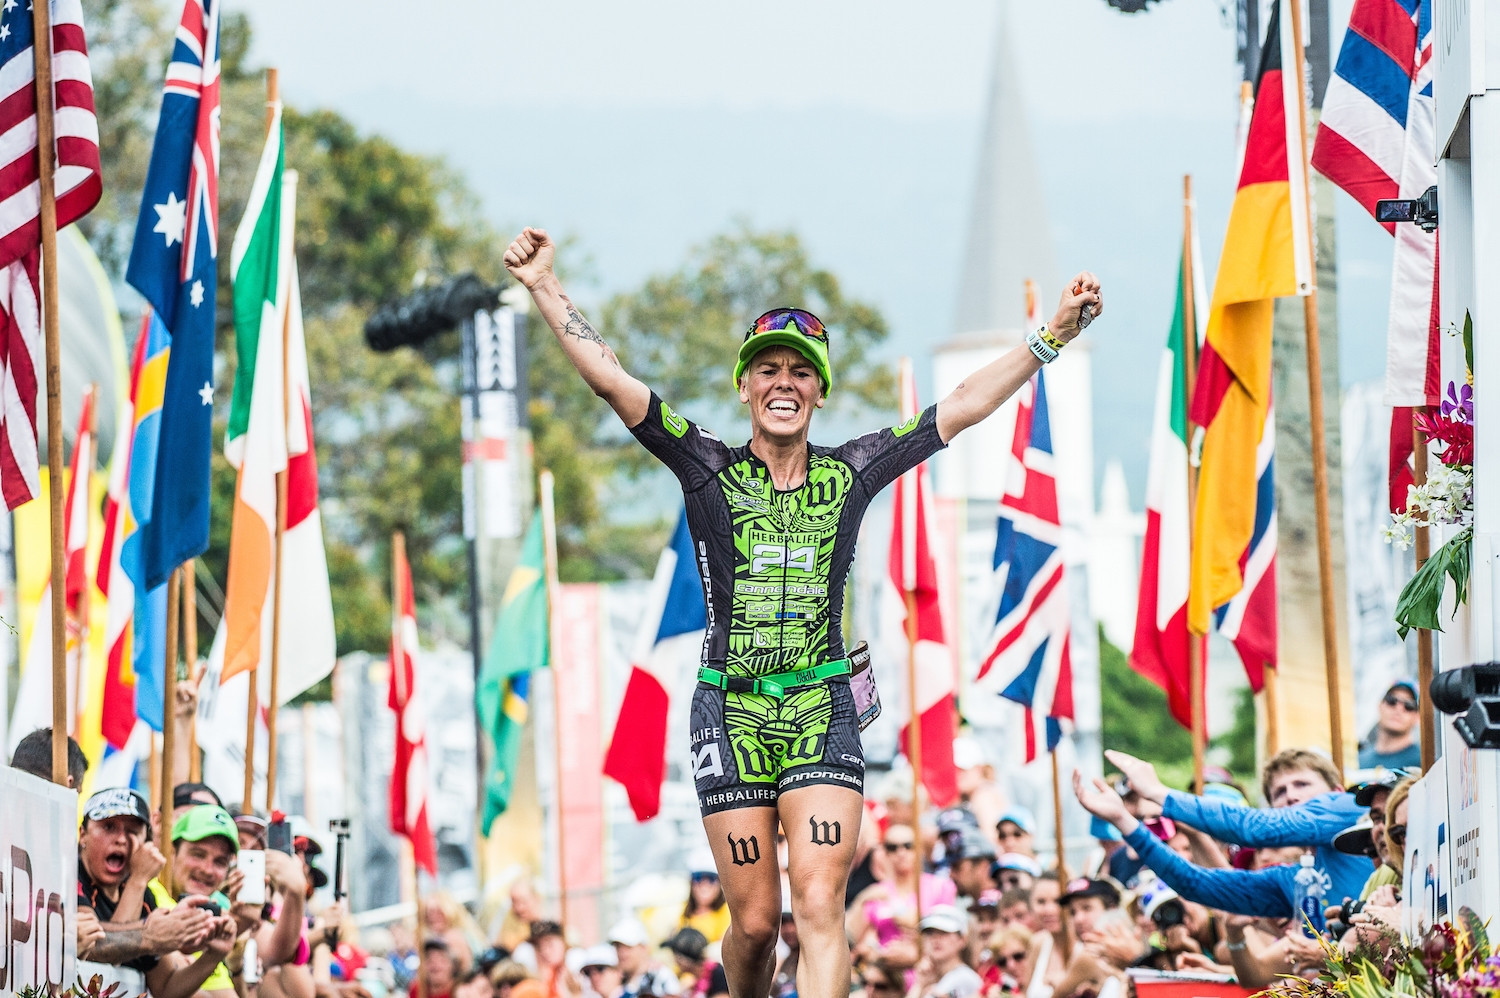 Heather Jackson, who in 2016 became the first United States woman to reach the Ironman World Championship podium since 2006, will be seeking to retain her title tomorrow ©Heather Jackson